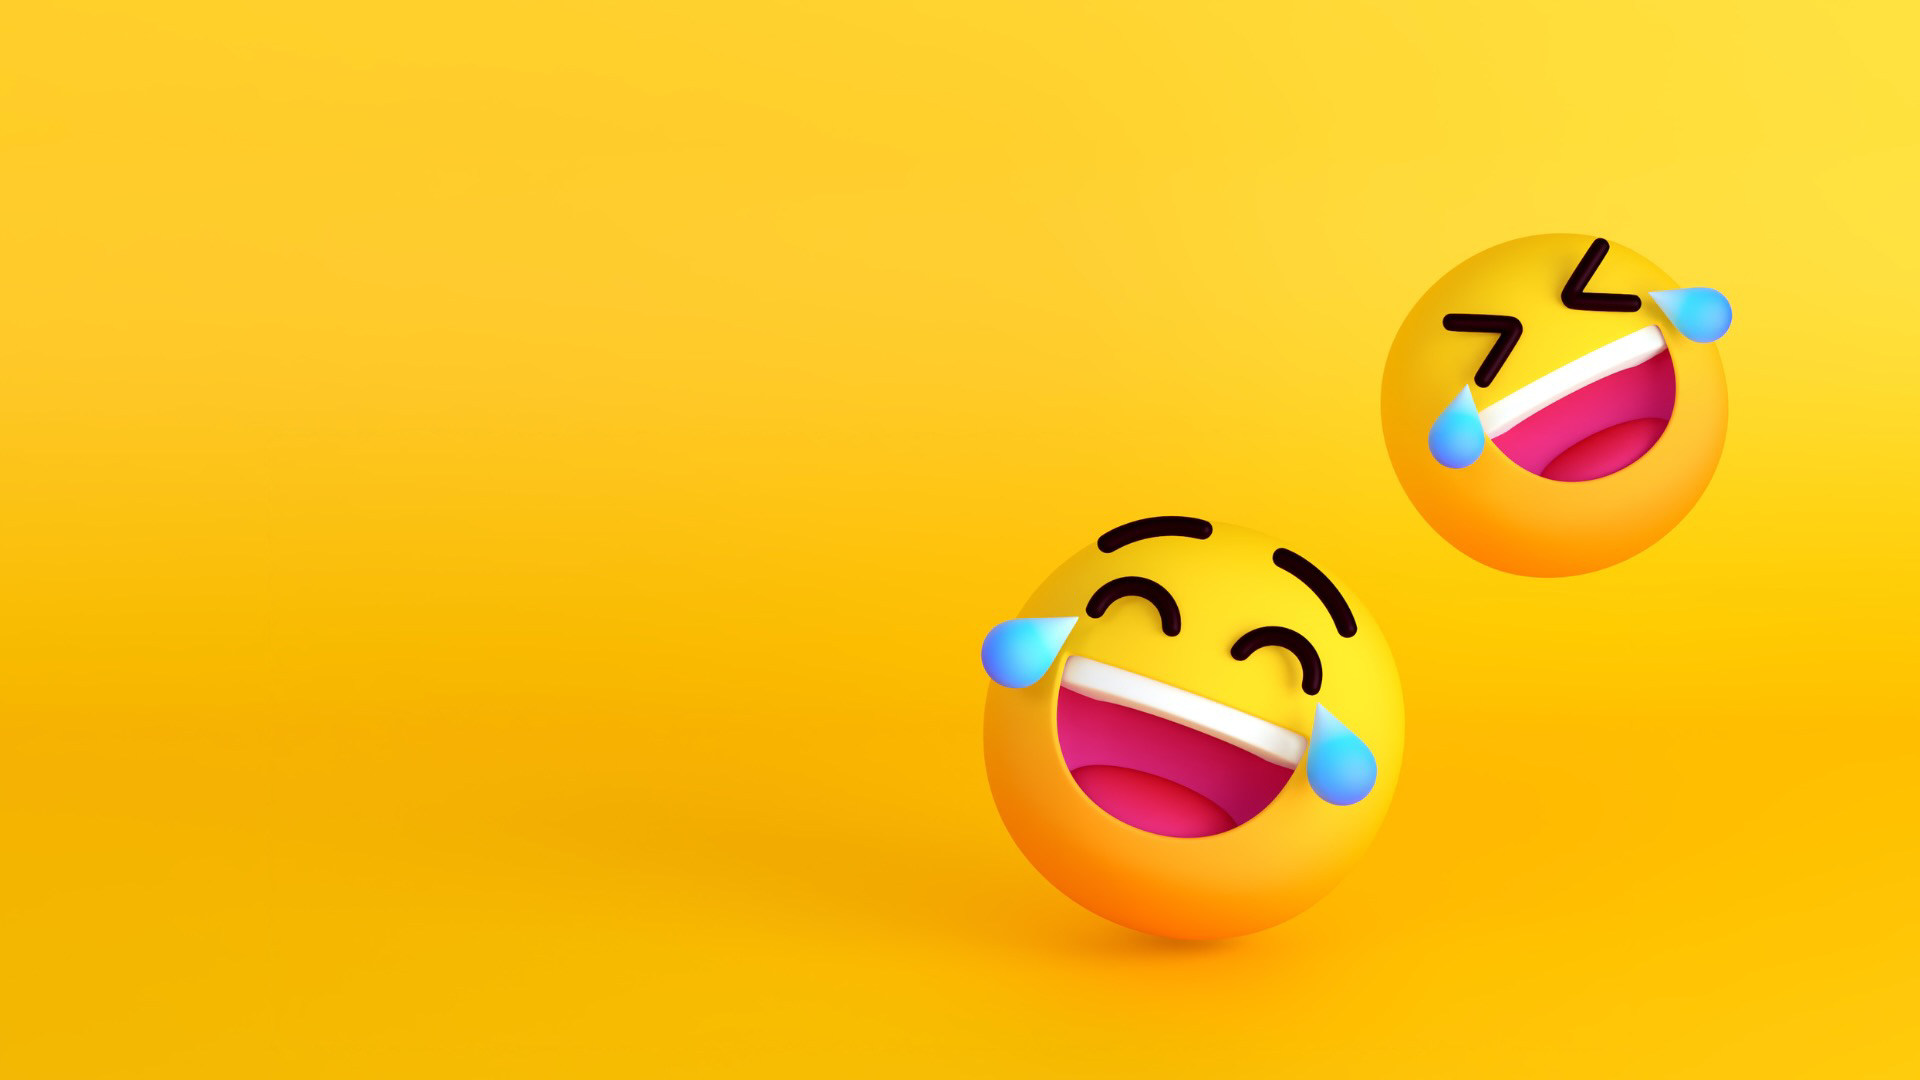 Two smiling emoticions on a yellow background